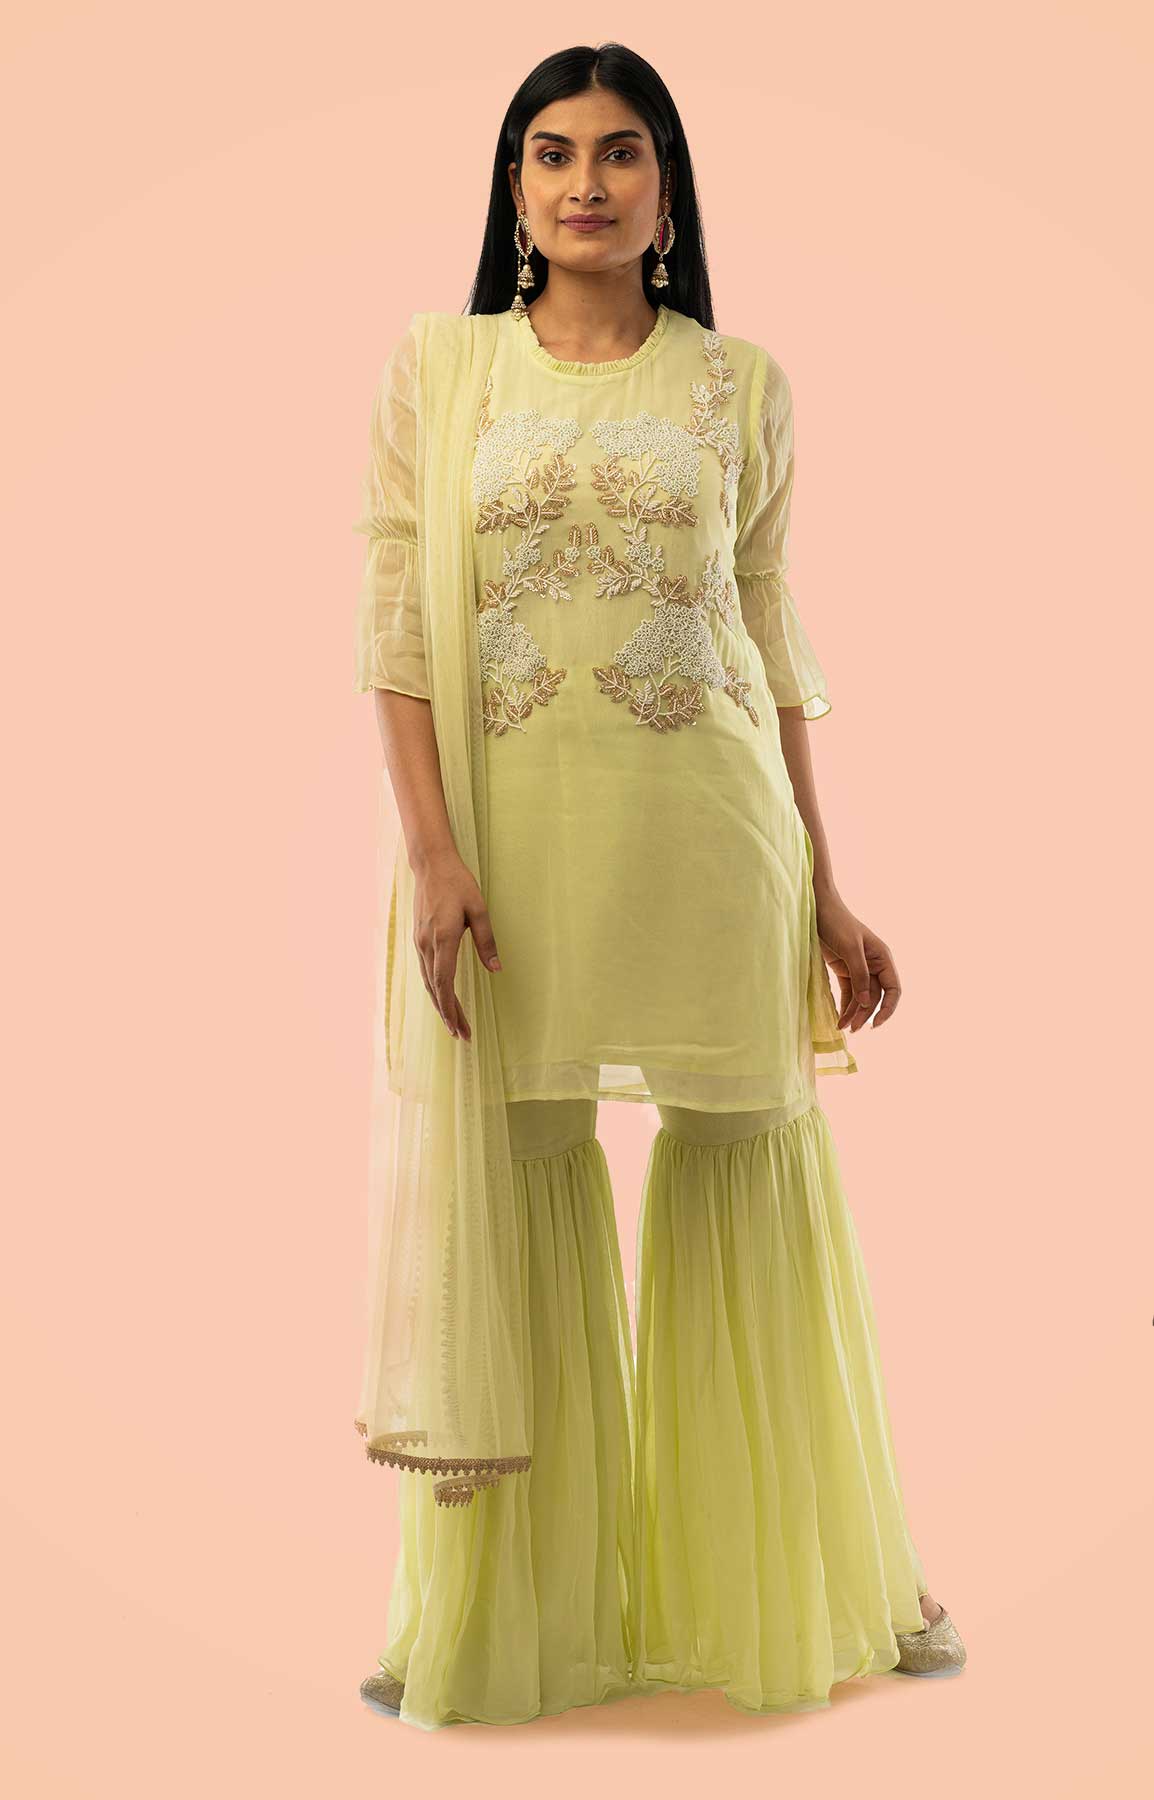 Apple Green Gharara Georgette Suit With Pearl And Antique Sequin Work – Viraaya By Ushnakmals